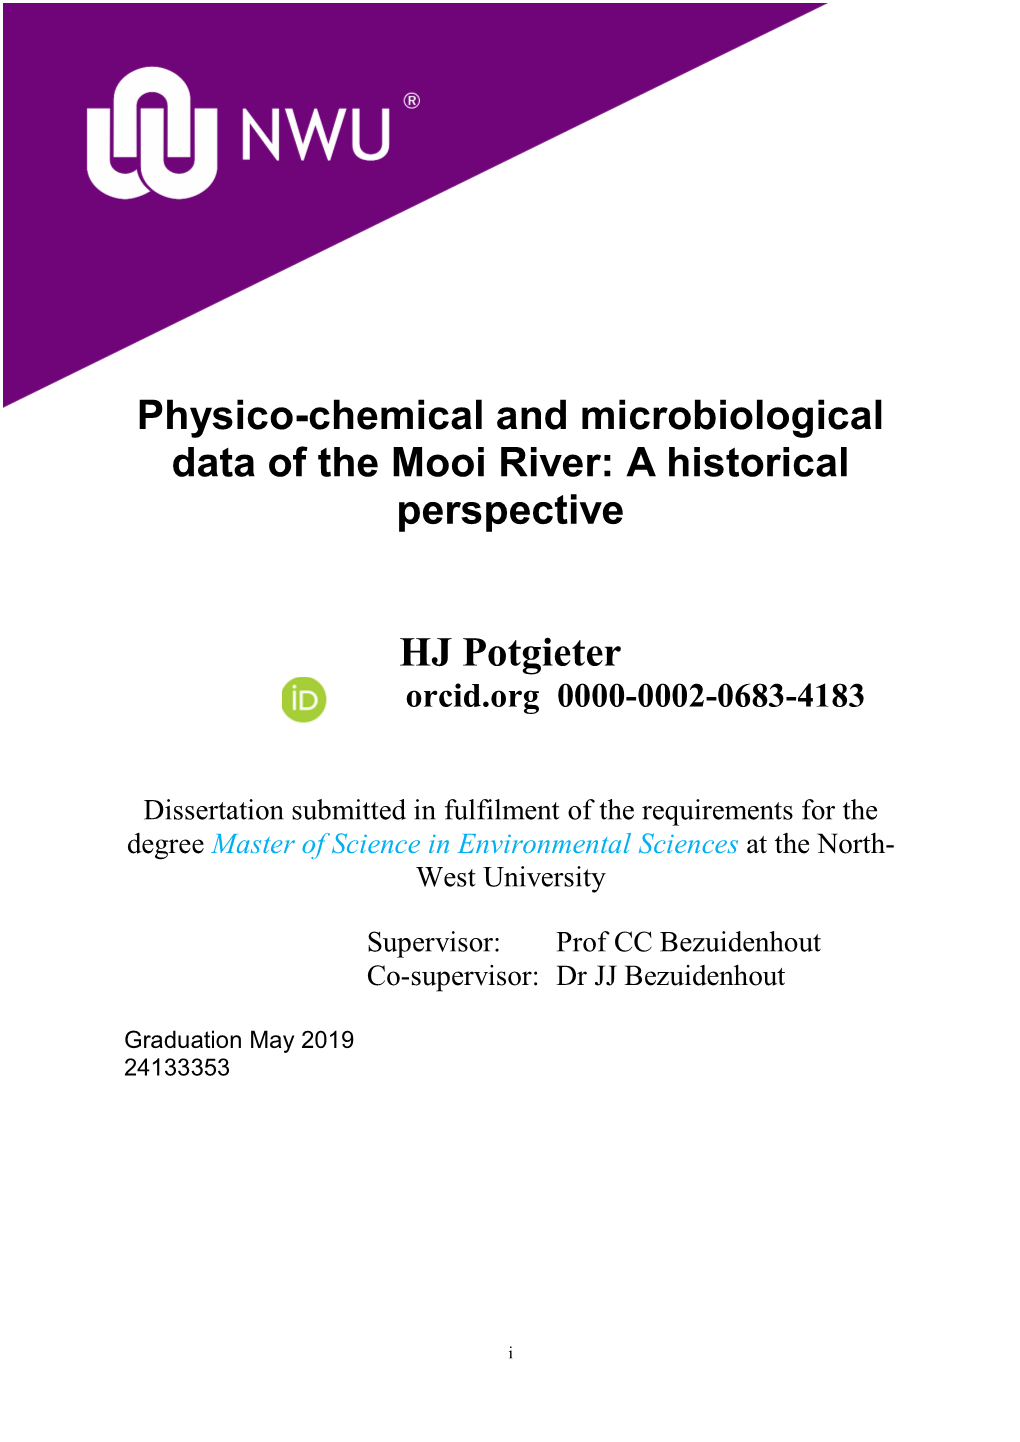 Physico-Chemical and Microbiological Data of the Mooi River: a Historical Perspective